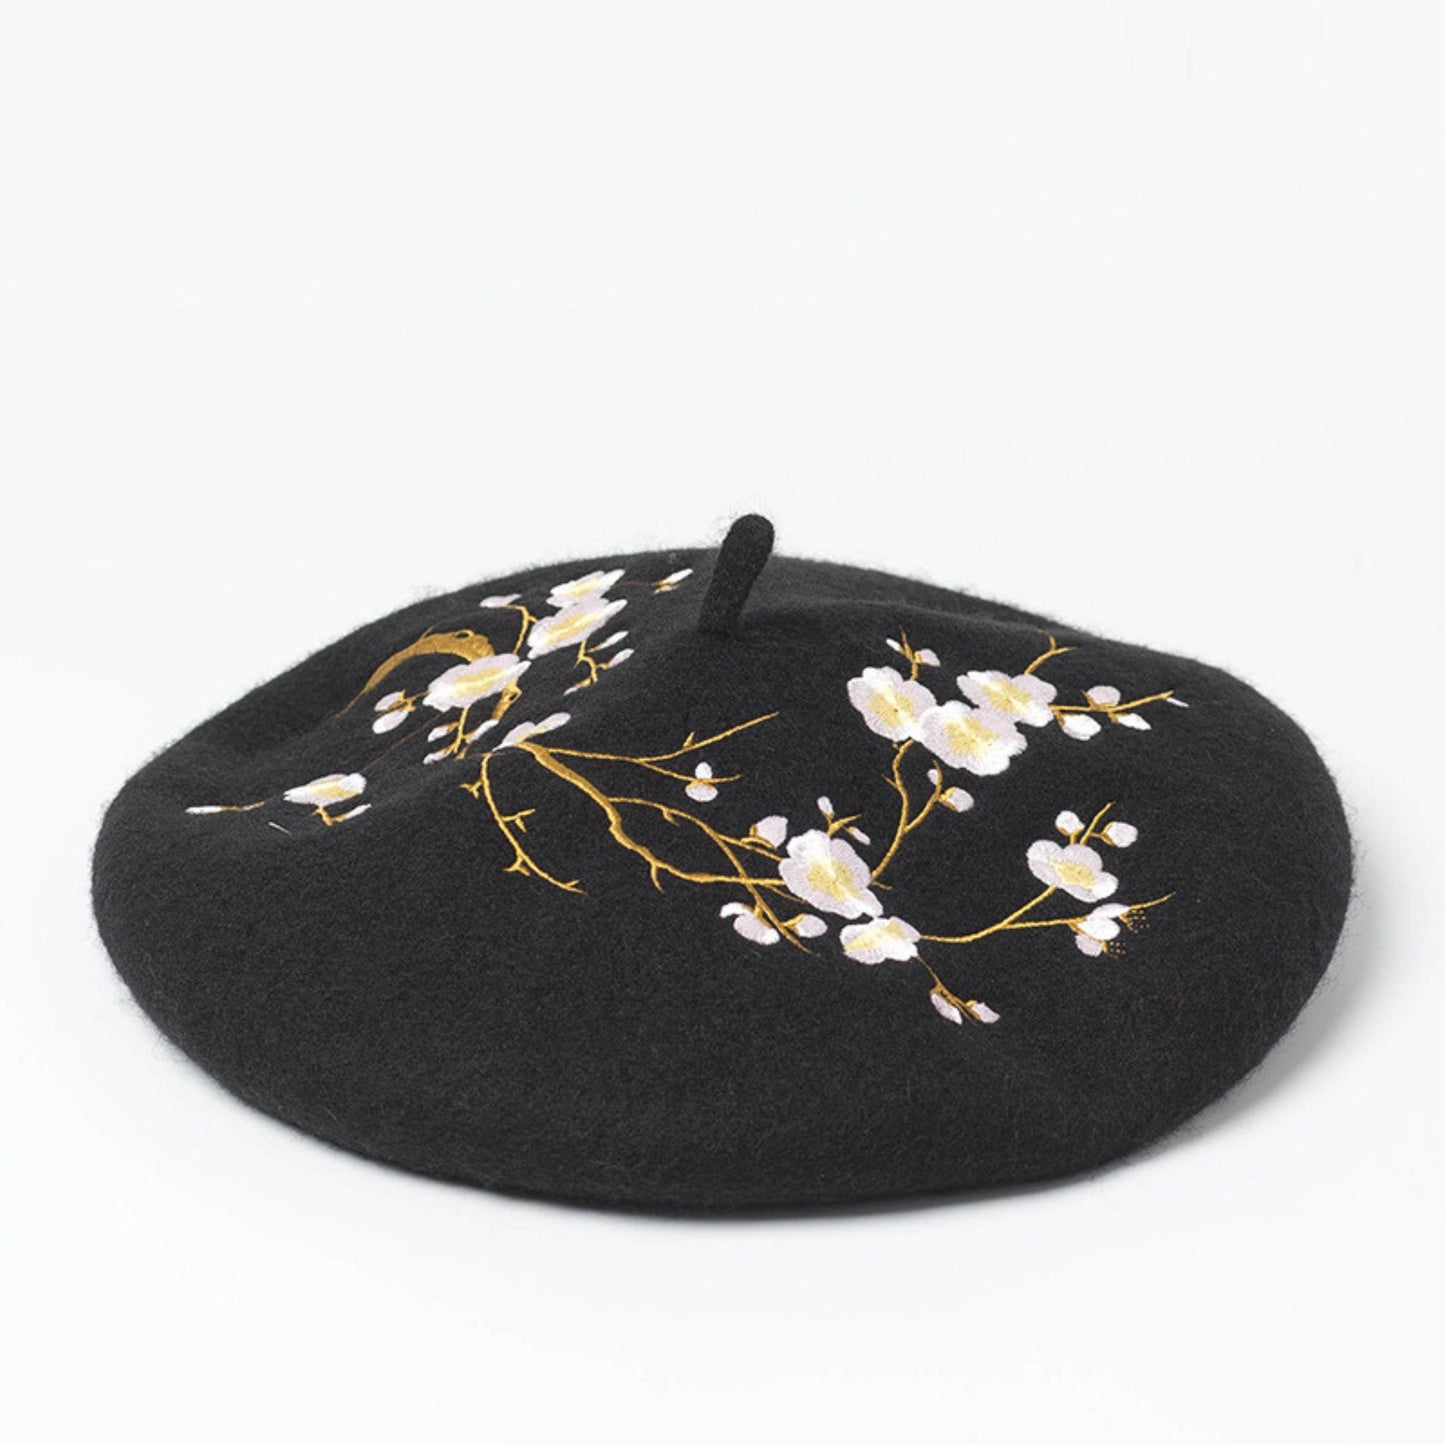 Handmade Winter Beret Hat Black with Embroidered Flowers